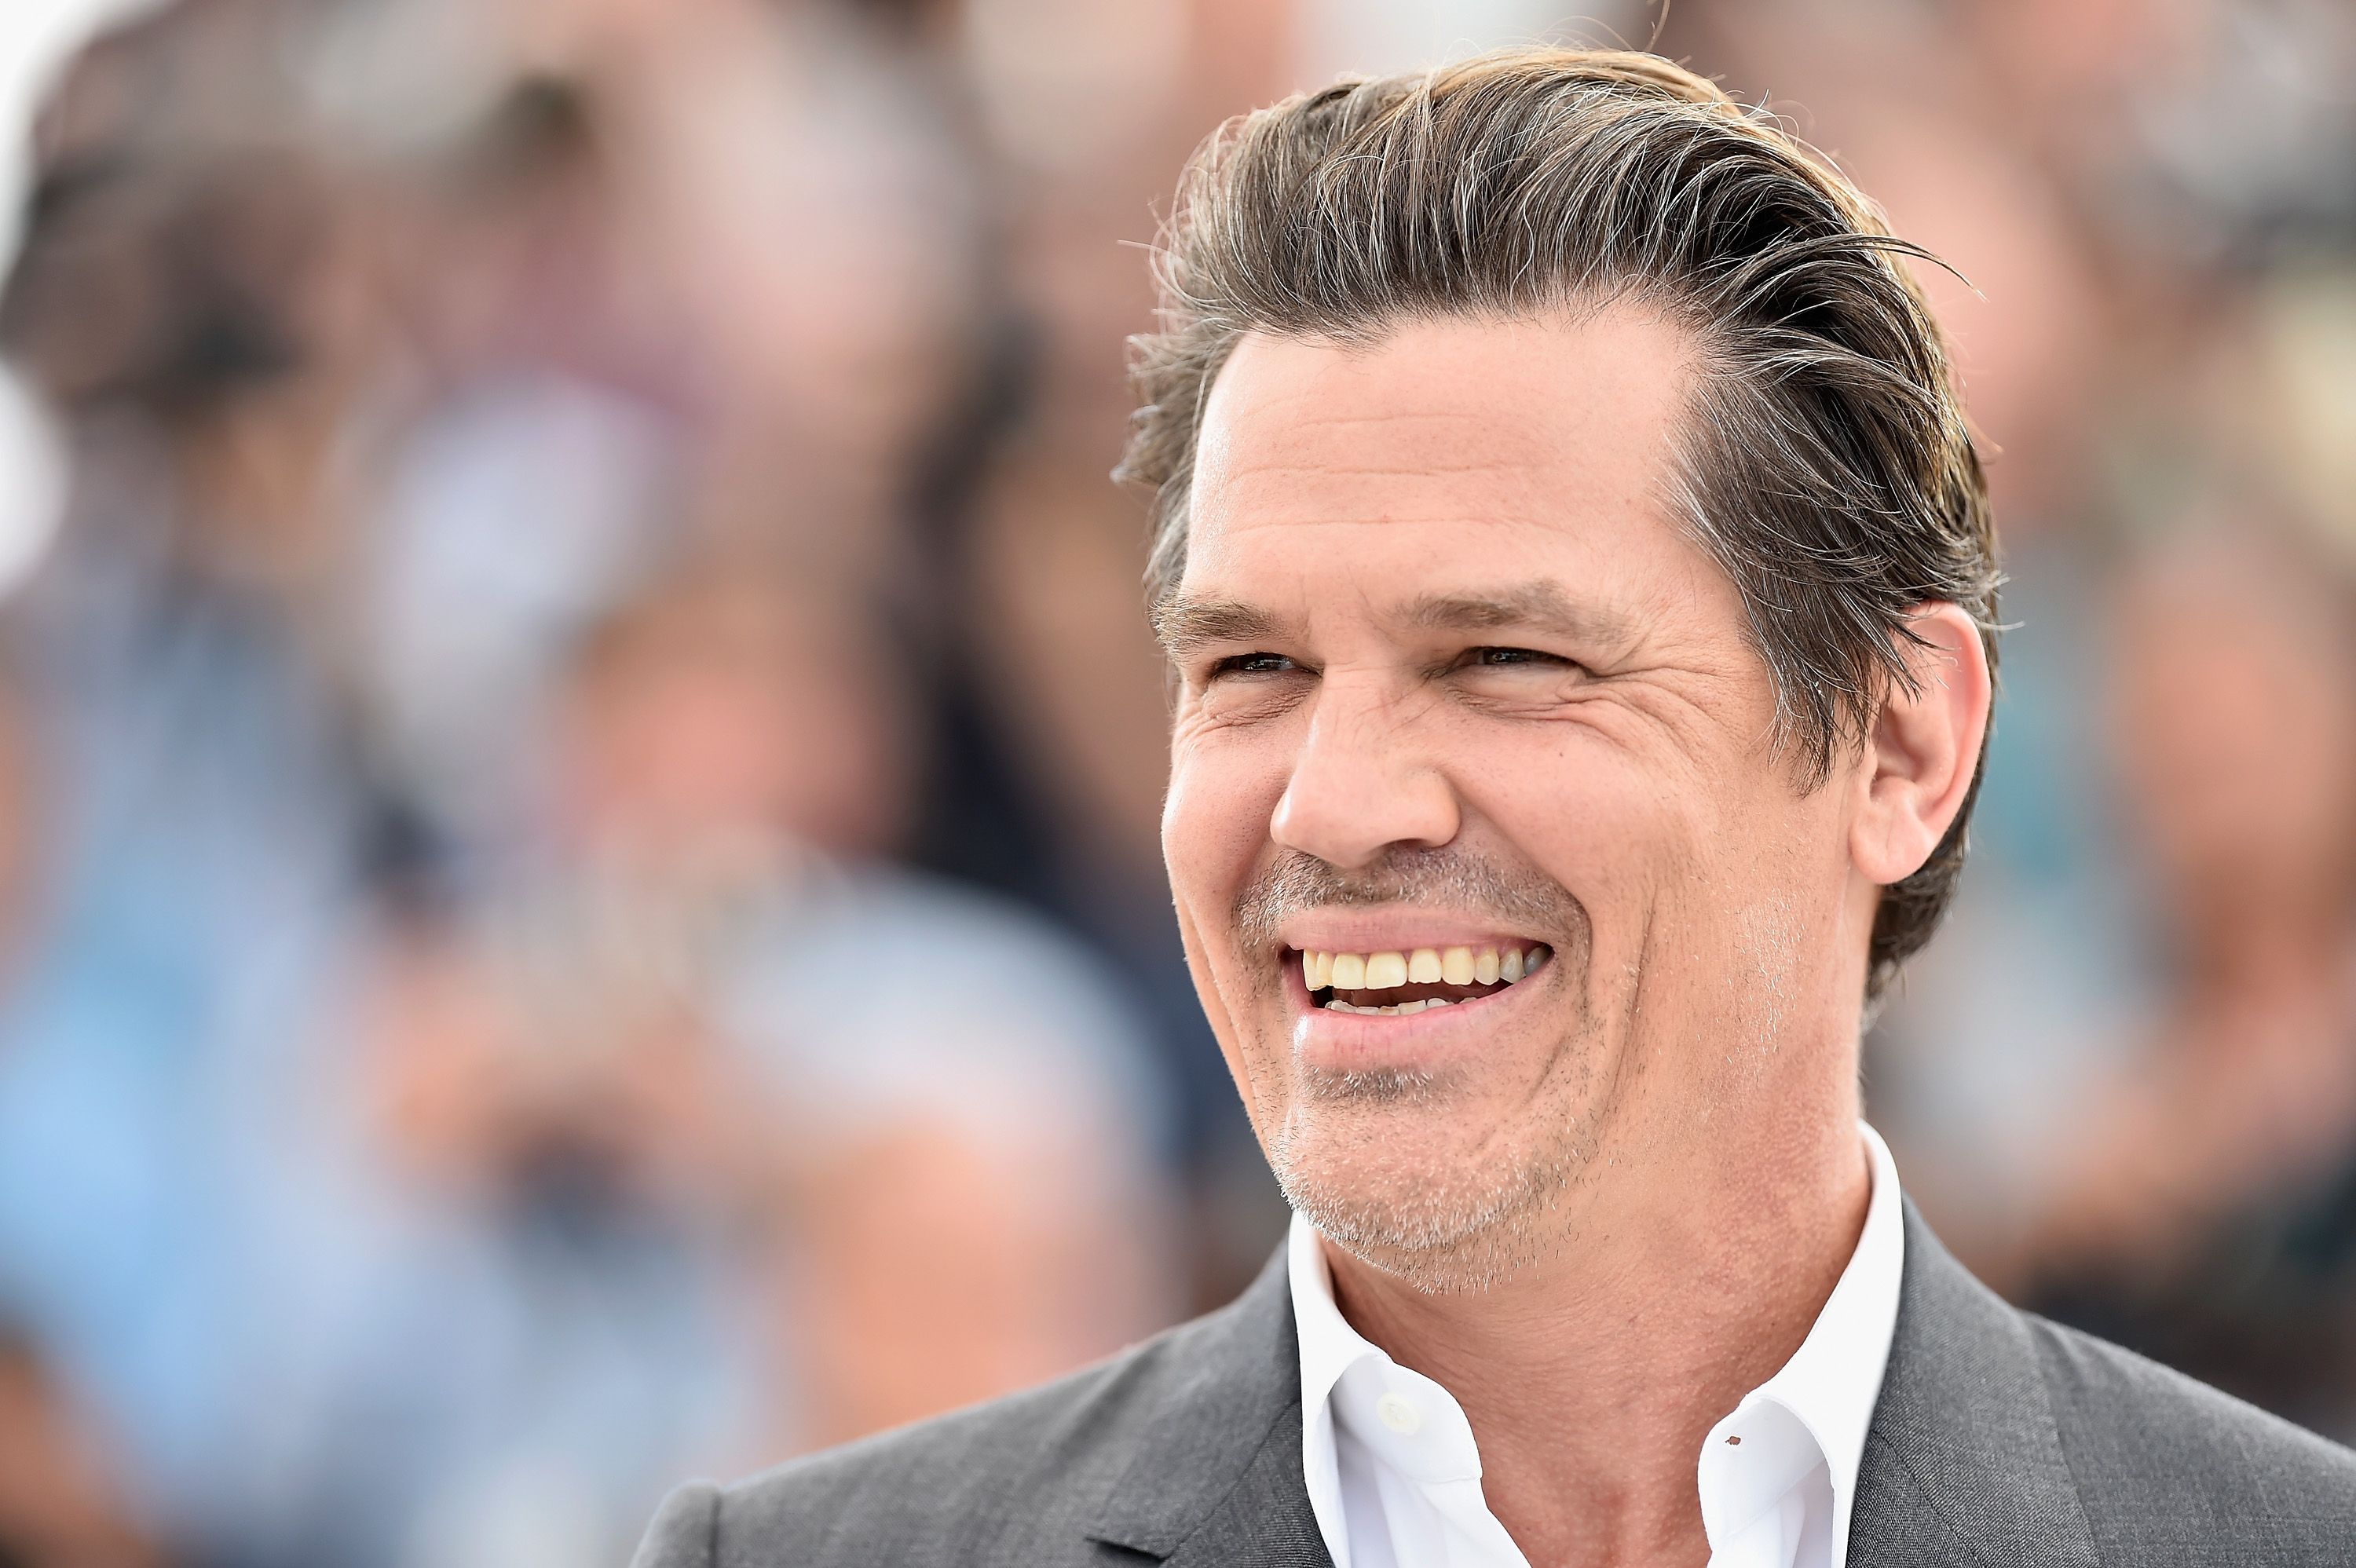 Josh Brolin during a photocall for "Sicario" during the 68th annual Cannes Film Festival on May 19, 2015 in Cannes, France. | Source: Getty Images